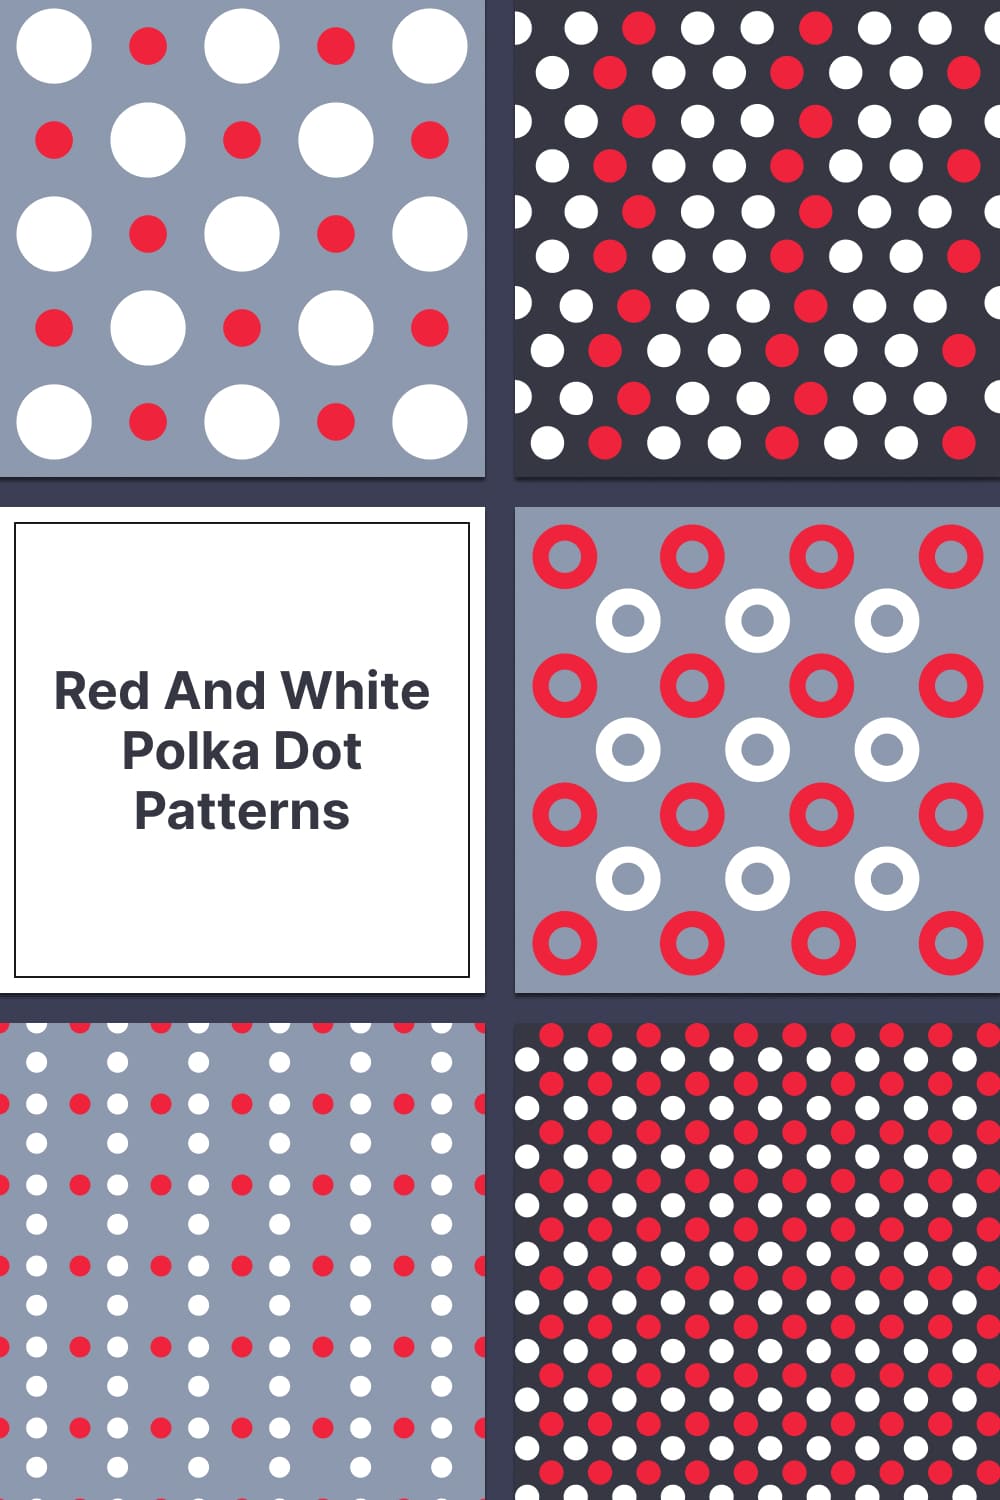 Red and white polka dots in different sizes.